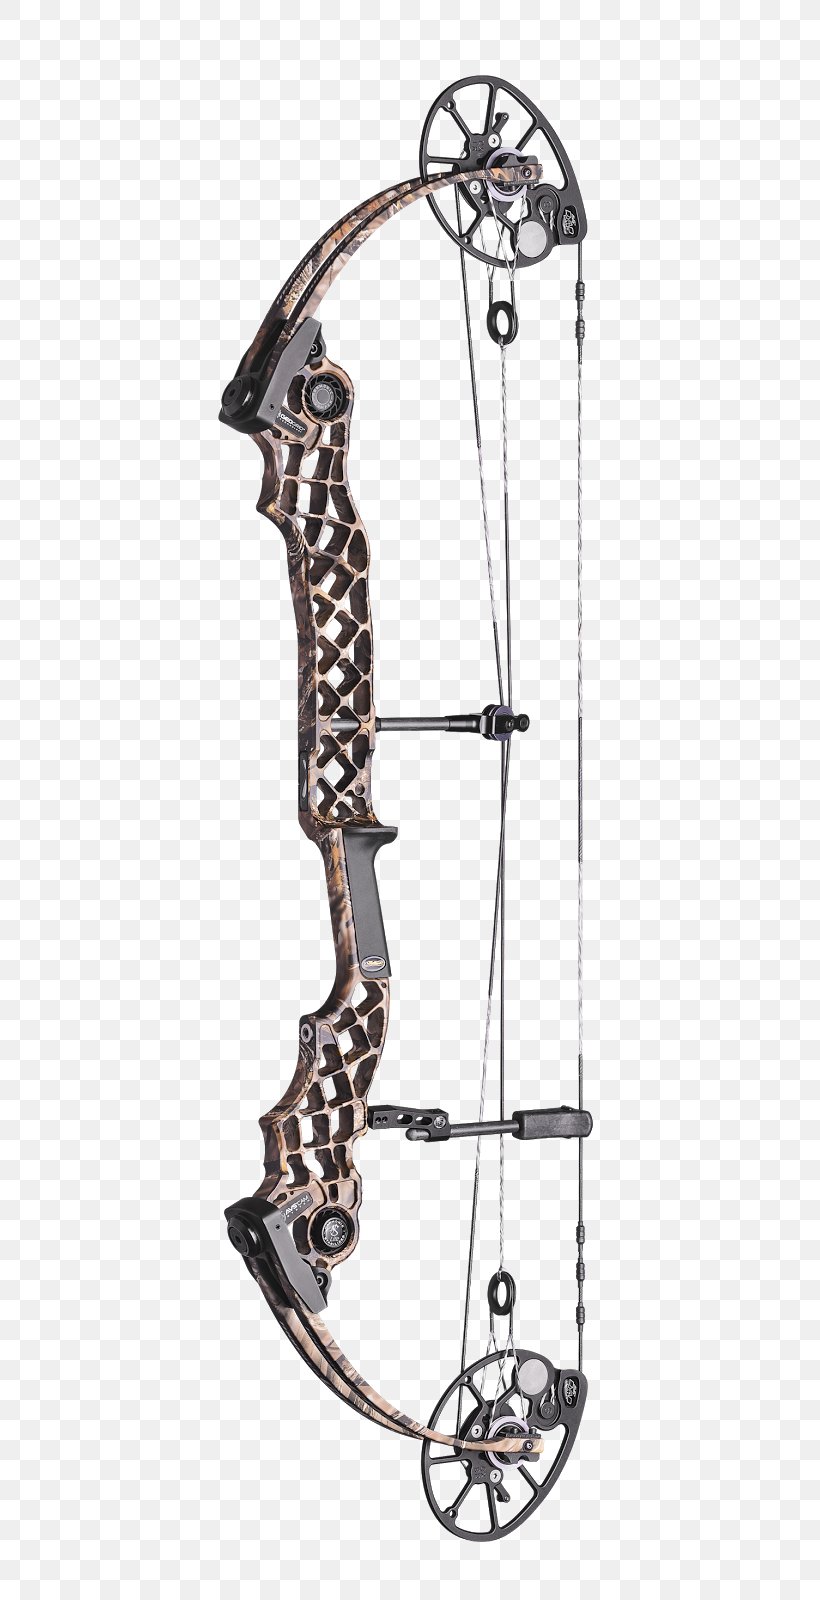 Compound Bows Bowhunting Archery Bow And Arrow, PNG, 583x1600px, Compound Bows, Archery, Bit, Bow, Bow And Arrow Download Free